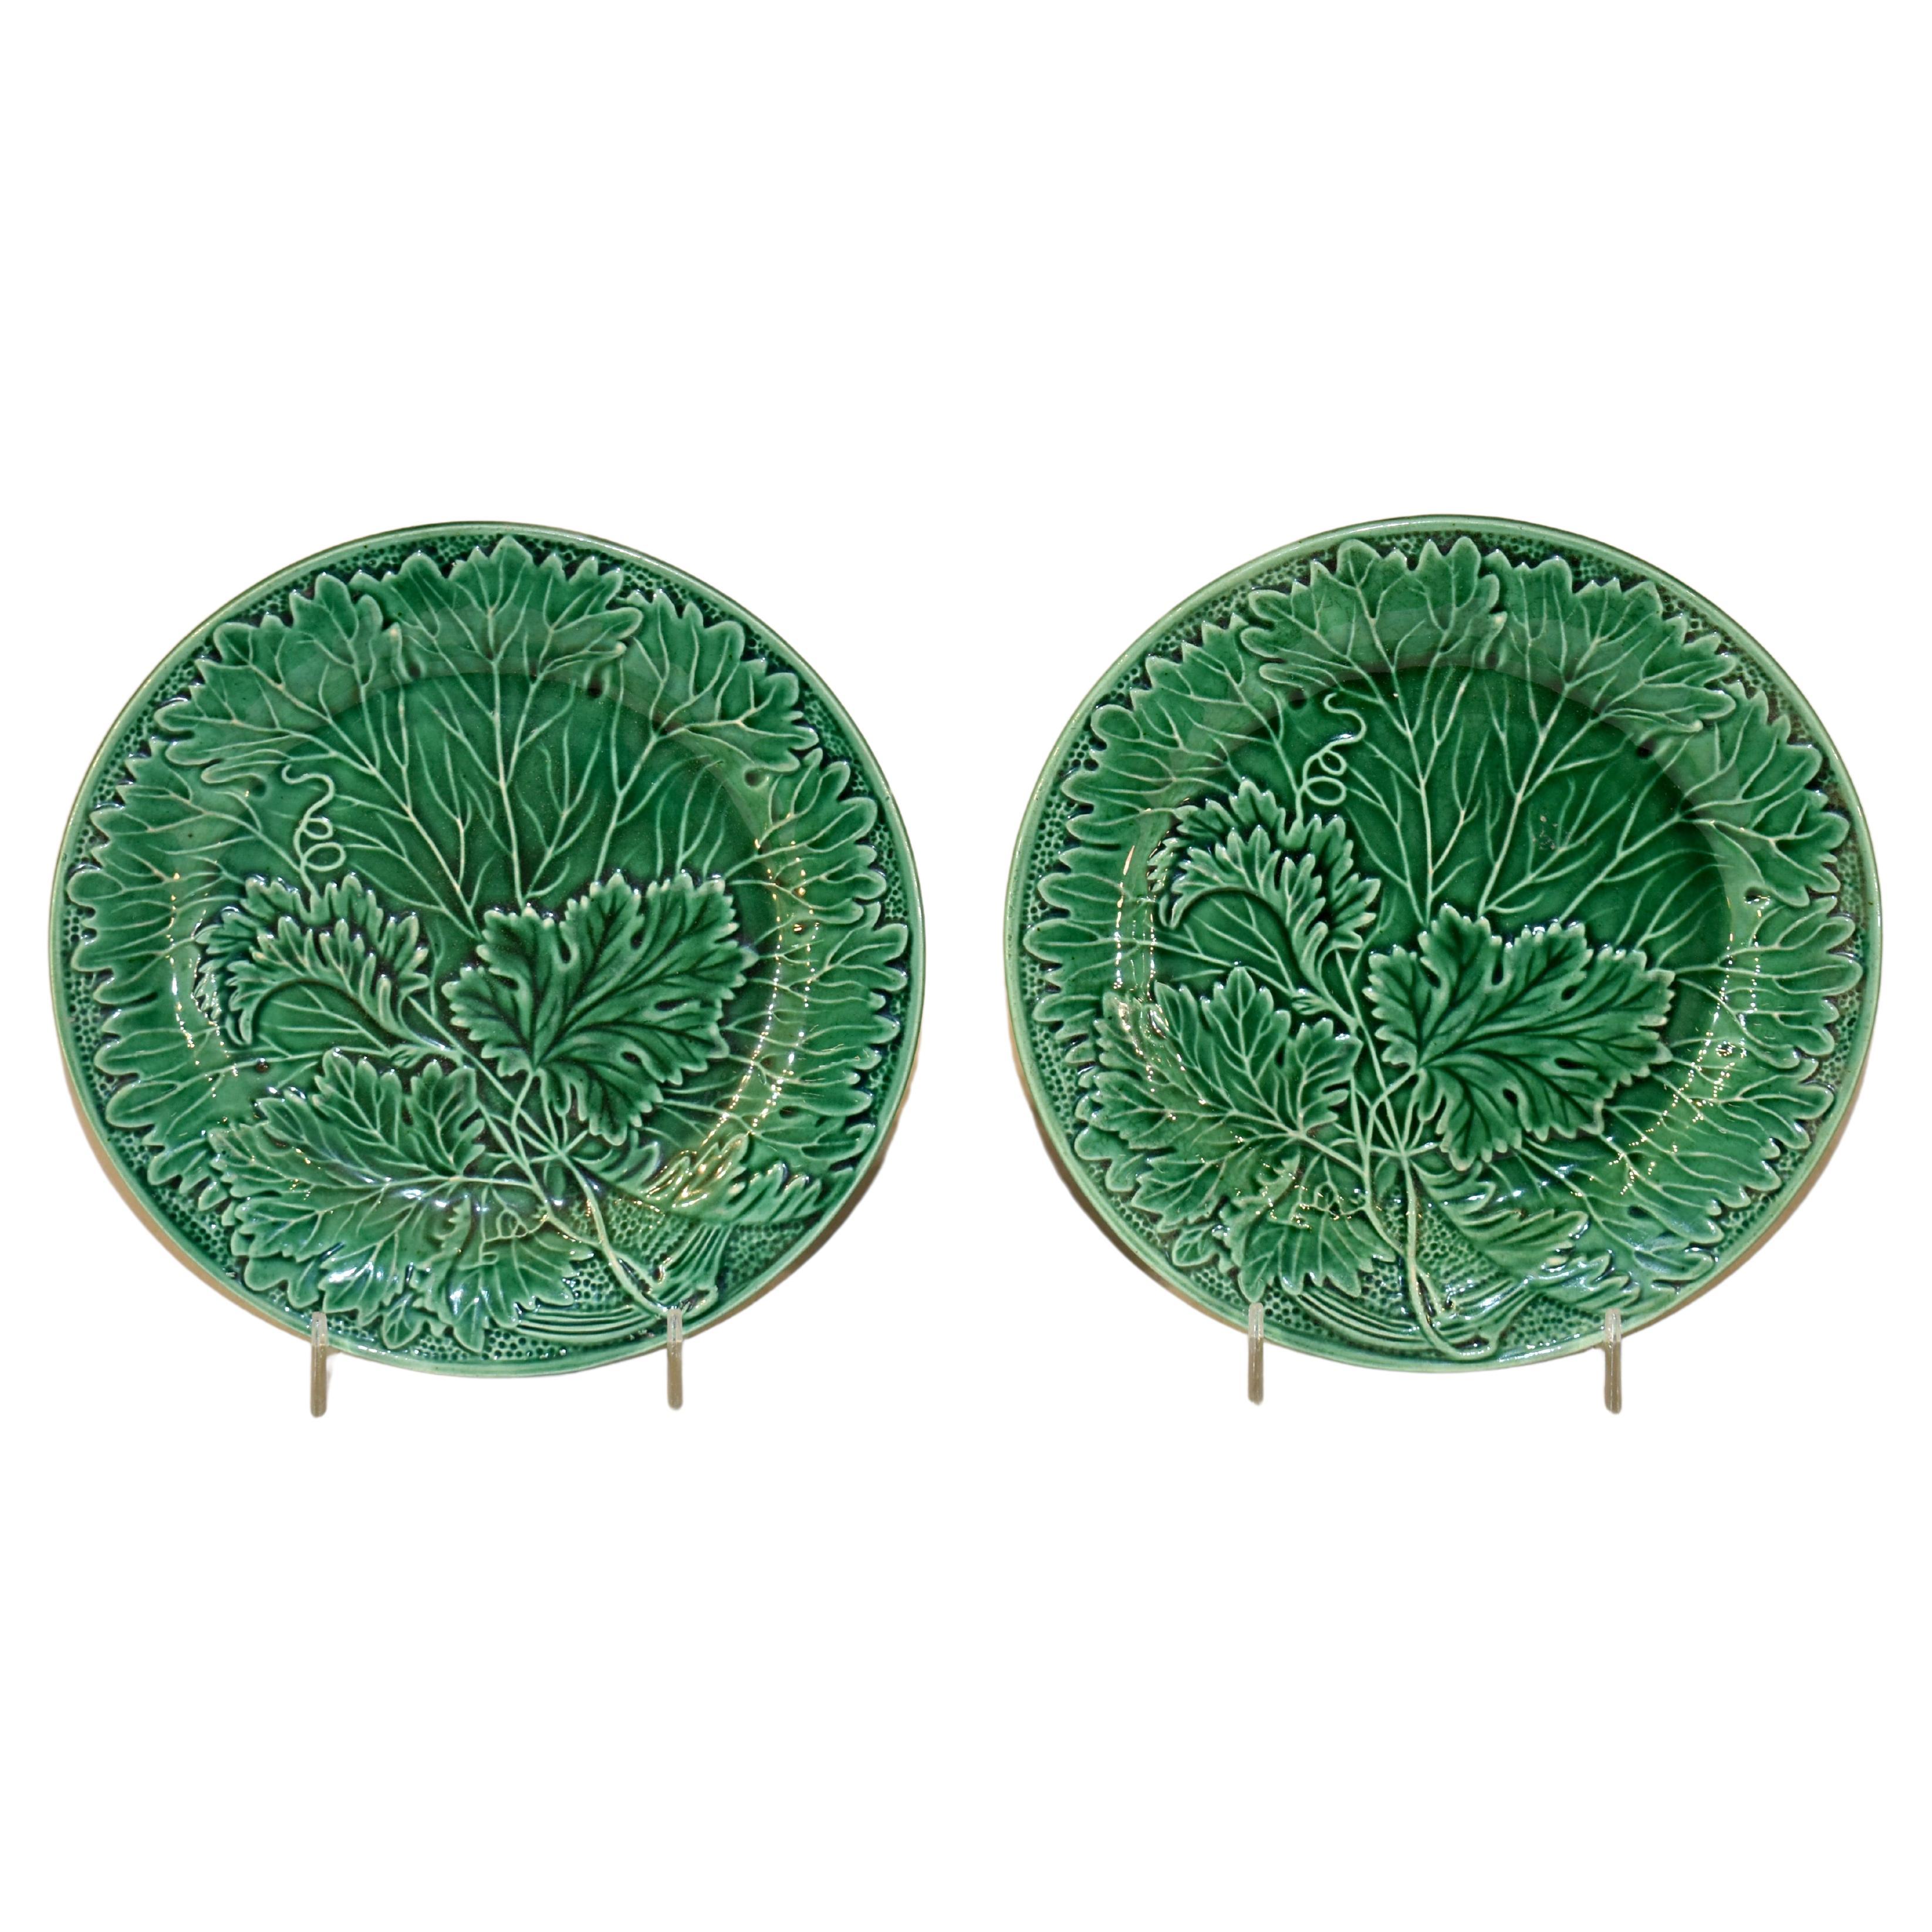 Pair of 19th Century Majolica Plates from England